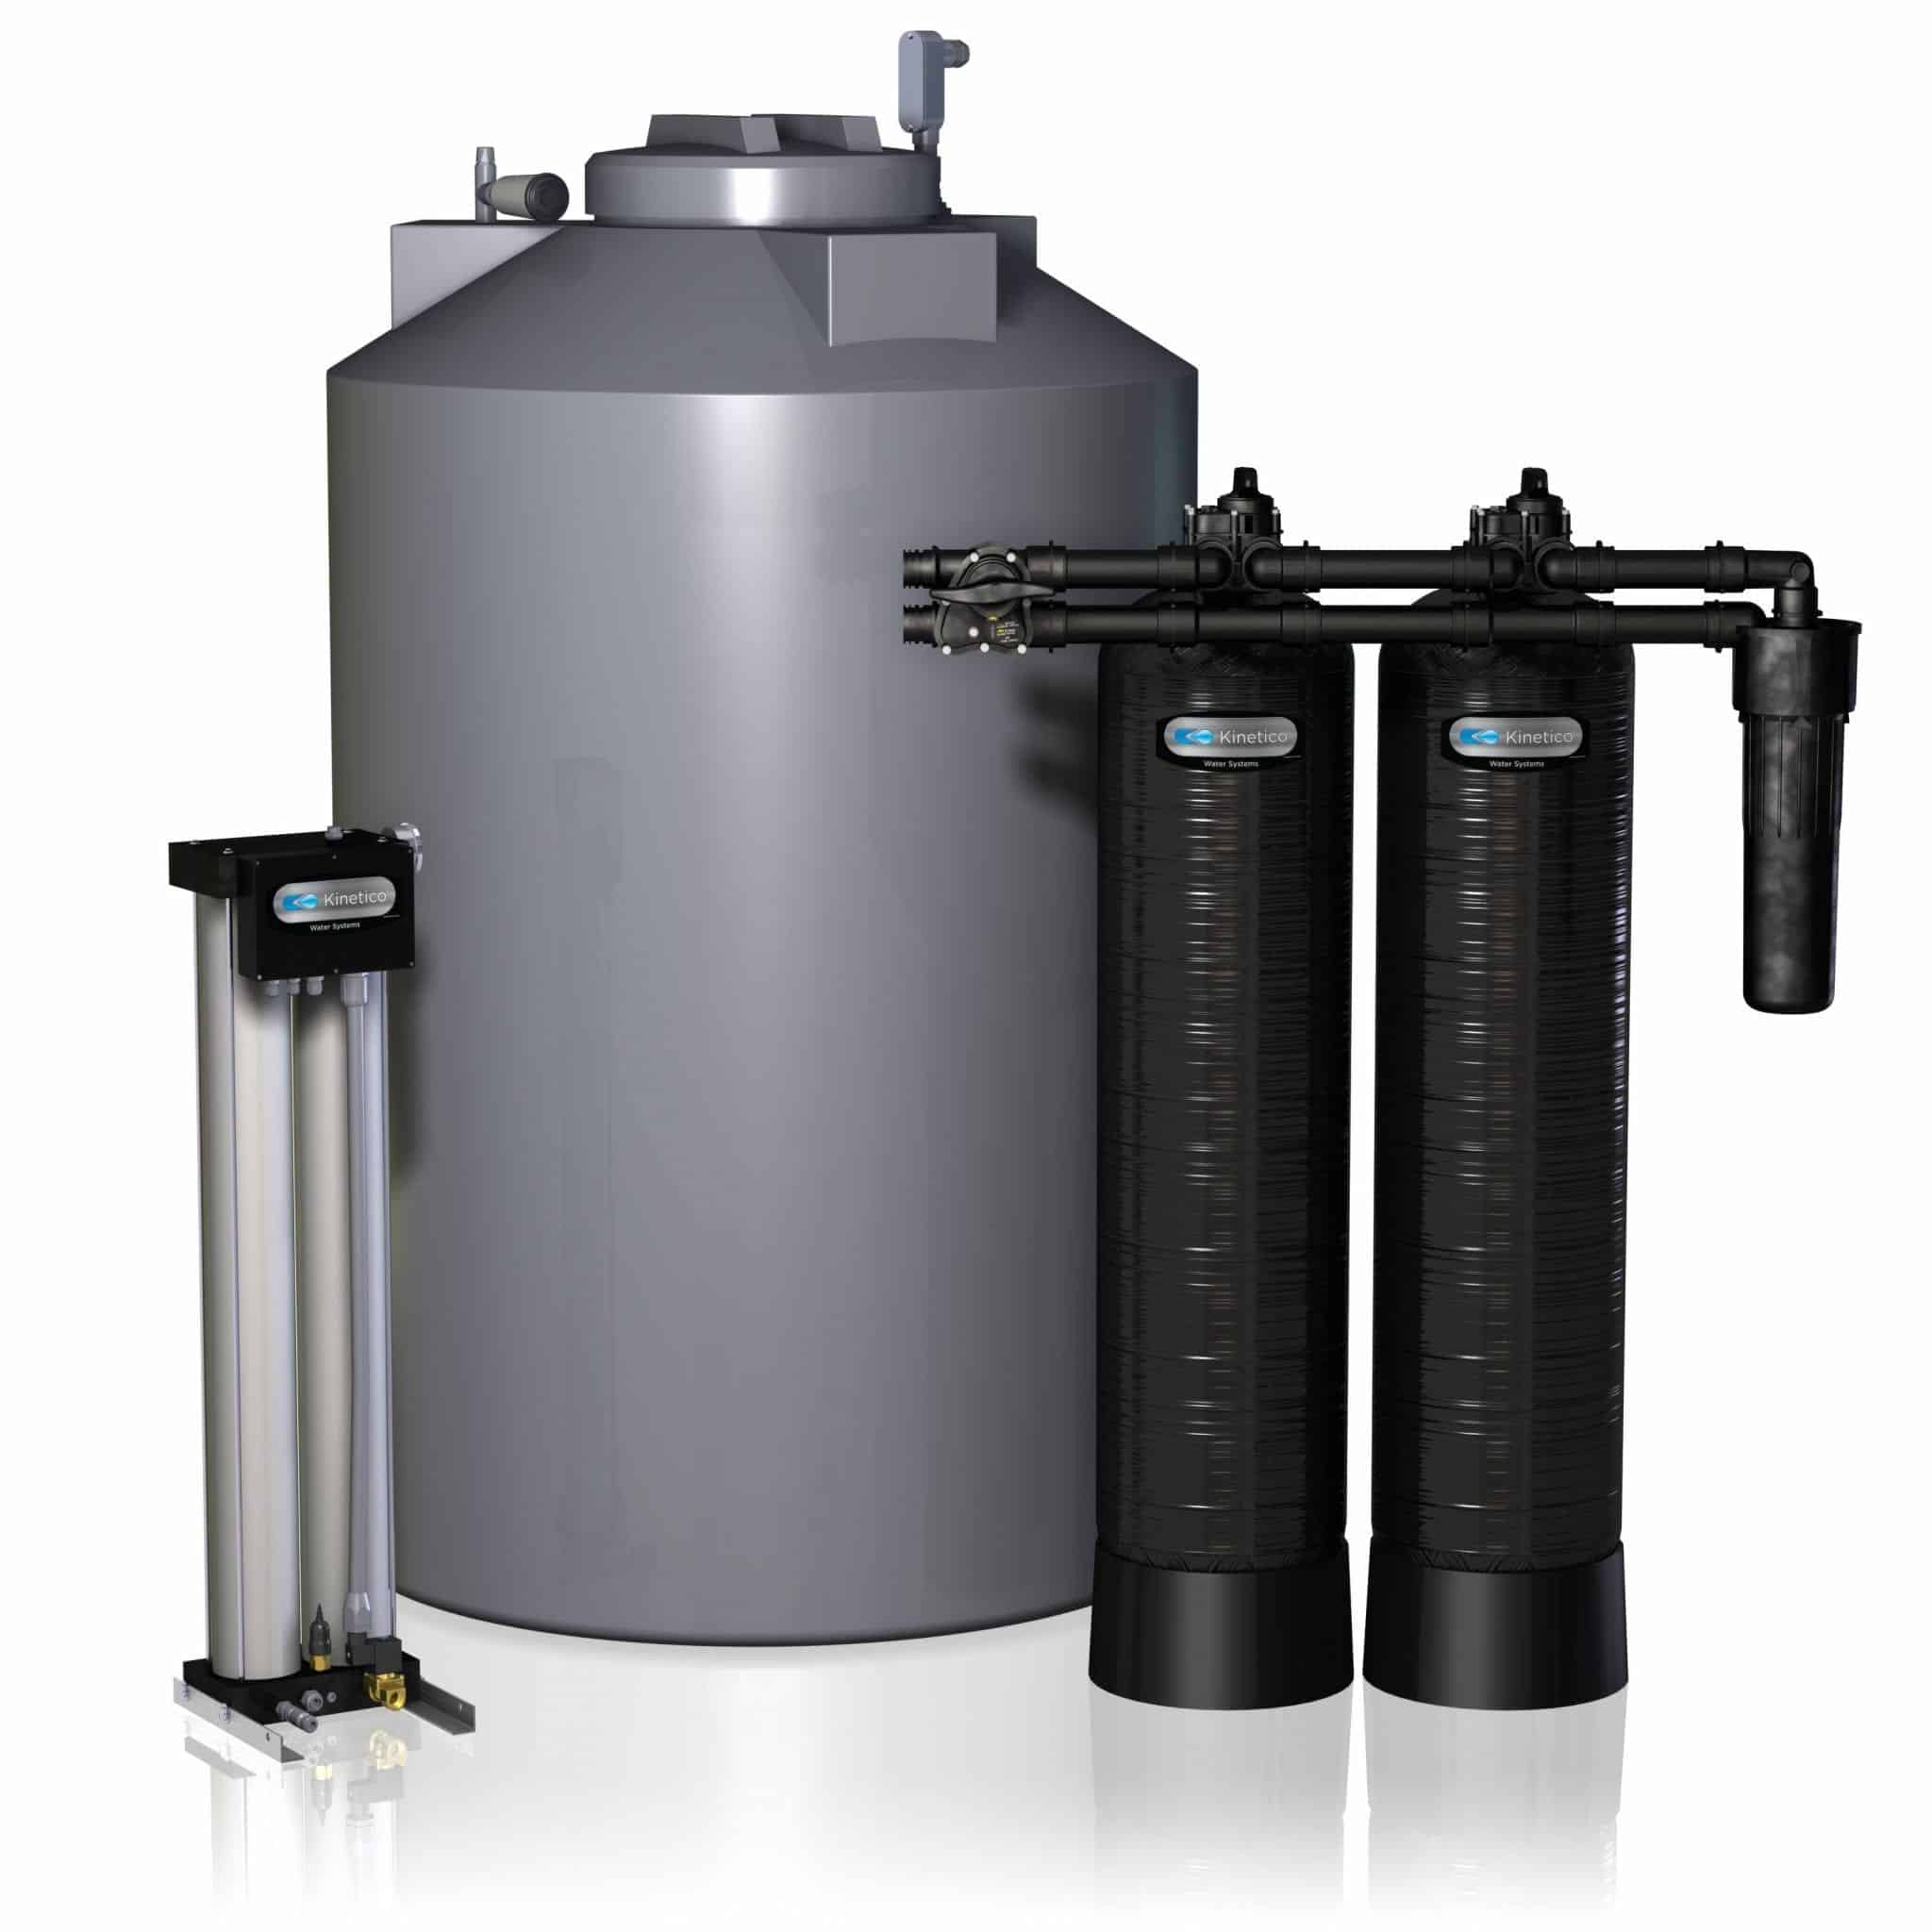 Kinetico water treatment system tanks